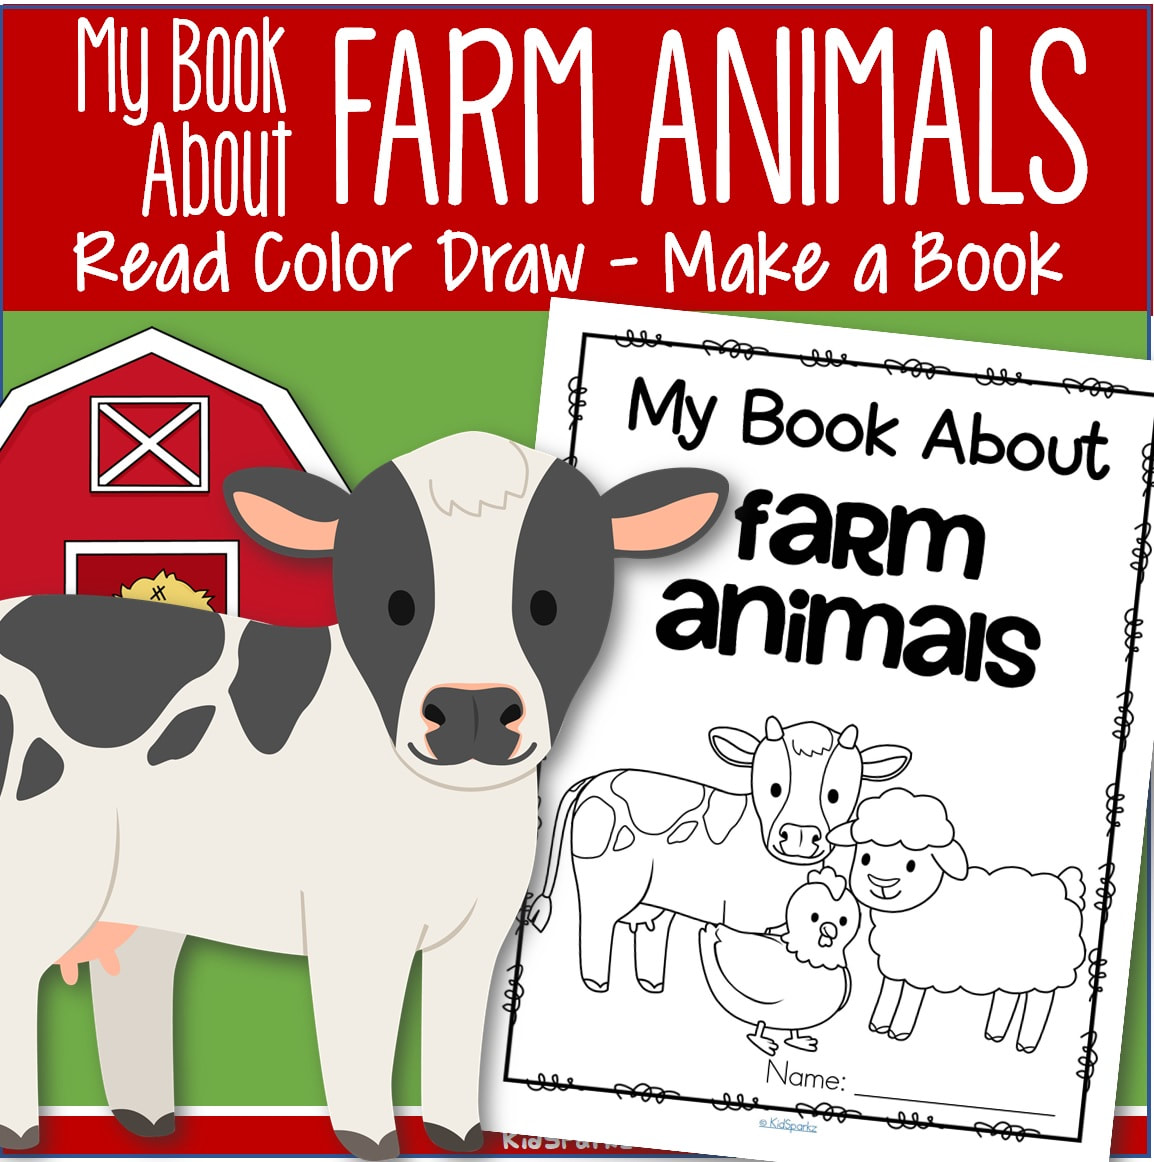 My Book About Farm Animals